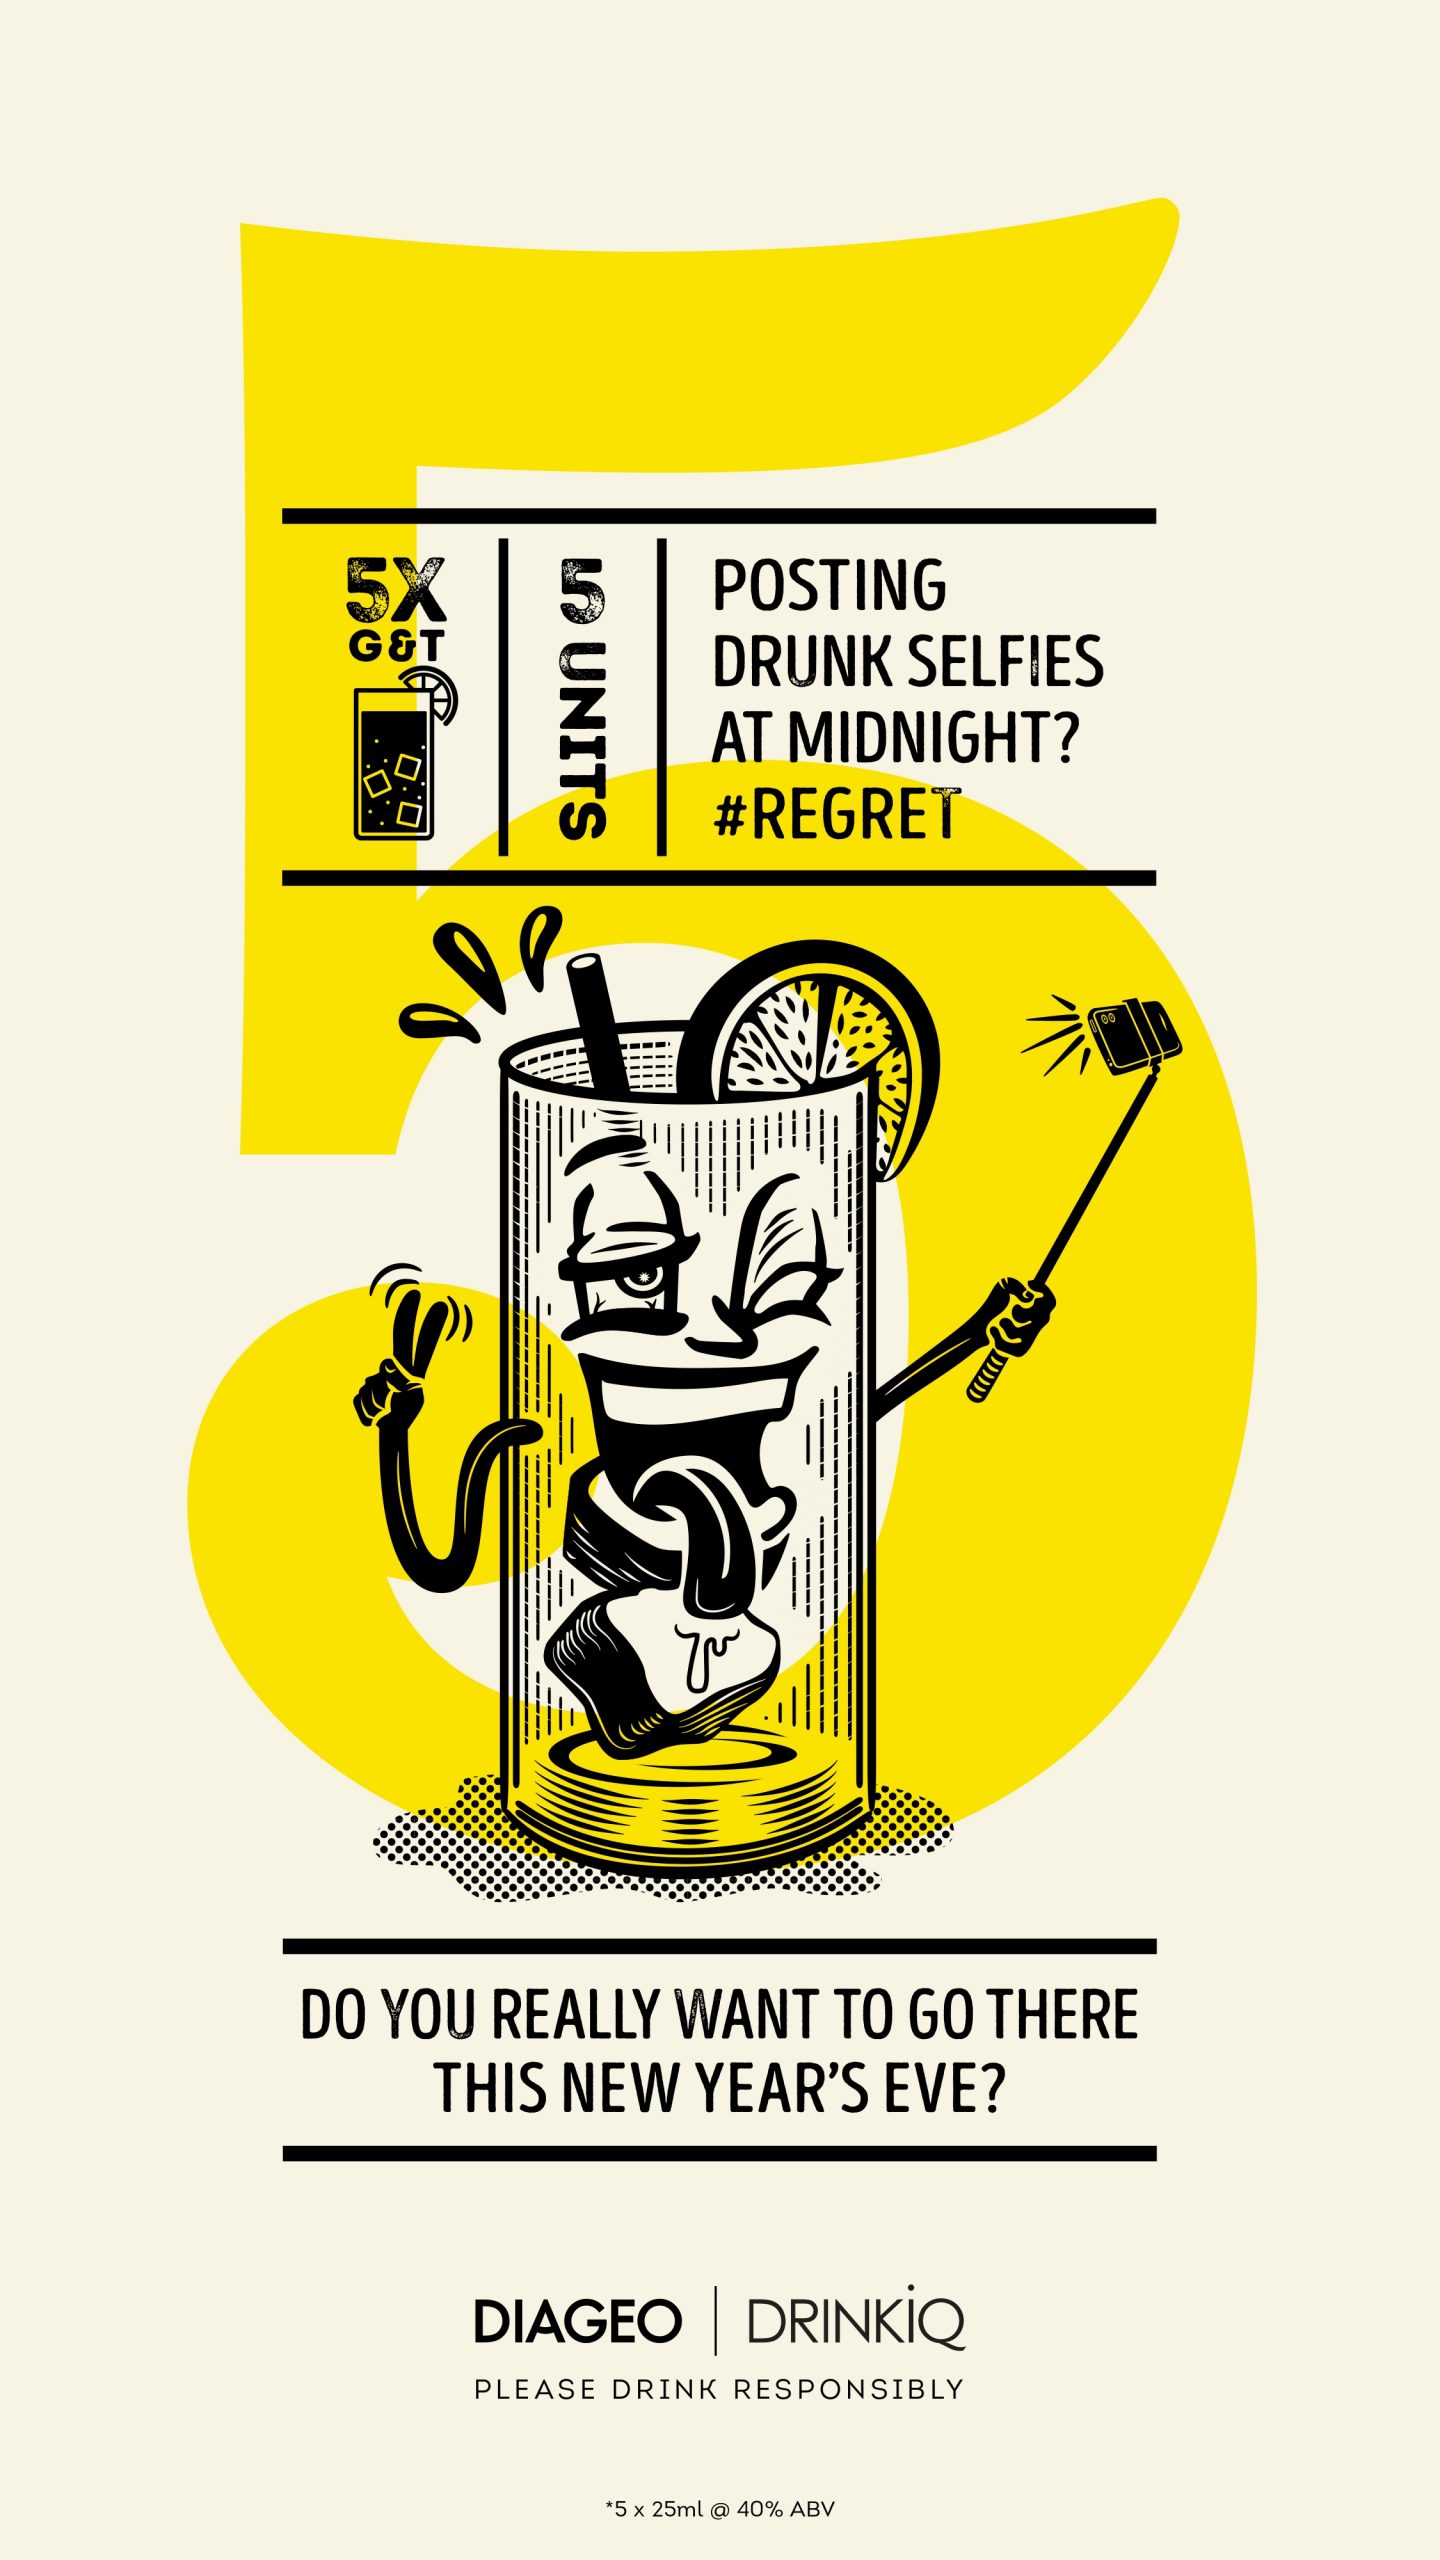 Diageo campaign sets New Year revellers thinking about moderation